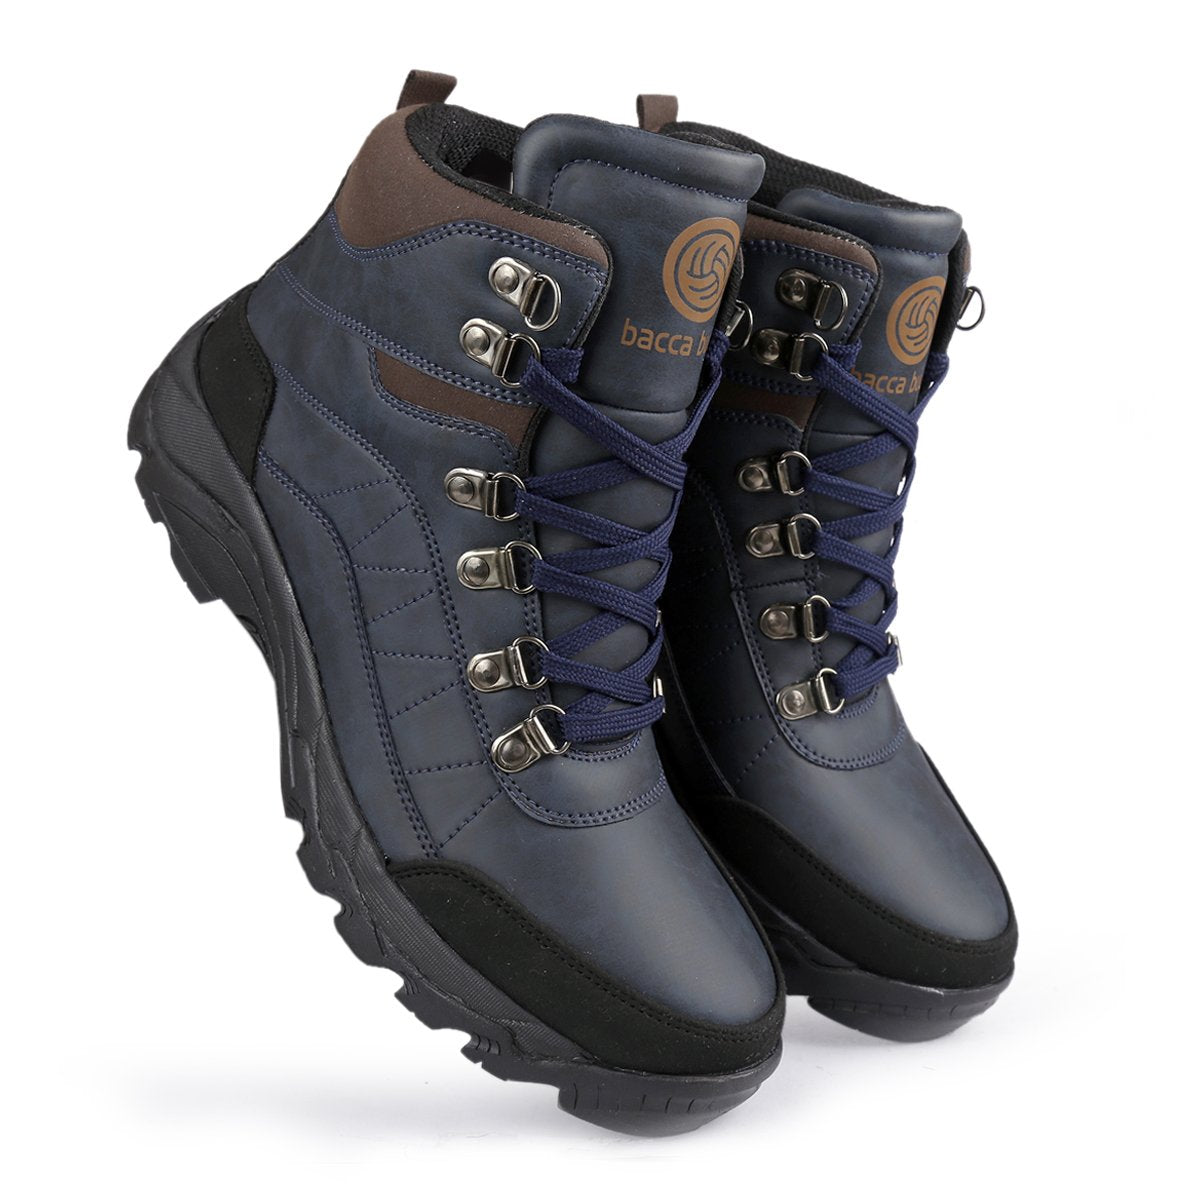  best snow boots, mens waterproof boots, high top ankle boots 